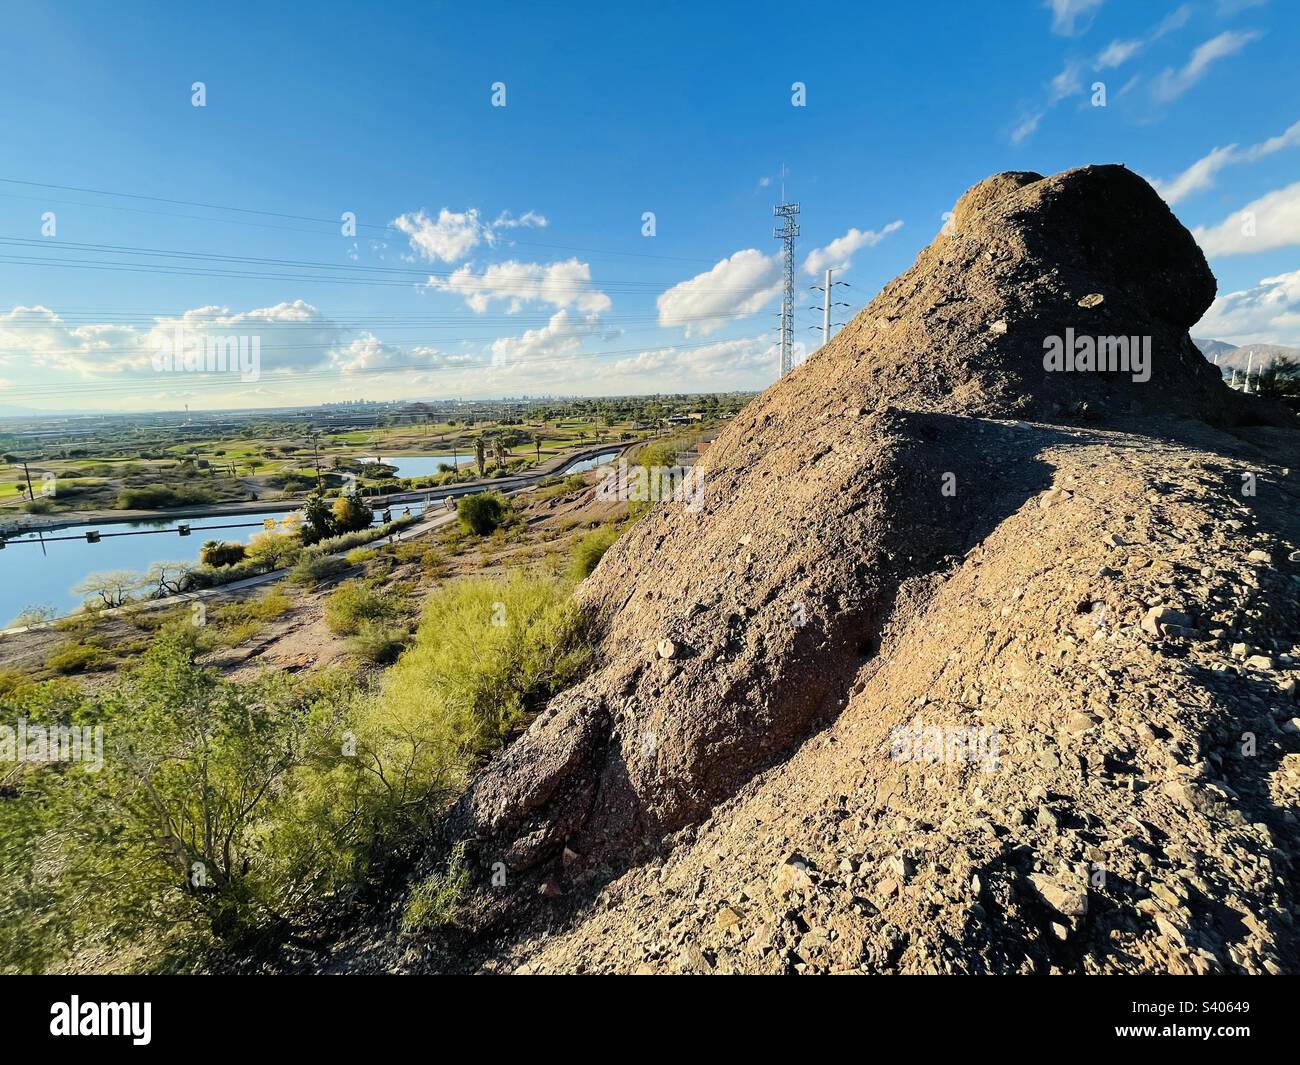 Rocky outcrops overlook green Rolling Hills golf course, Papago Park ponds, Tempe canals. Blue sky with fluffy clouds. Zoom in to see Sky harbor airport control tower, Phoenix AZ downtown skyline Stock Photo